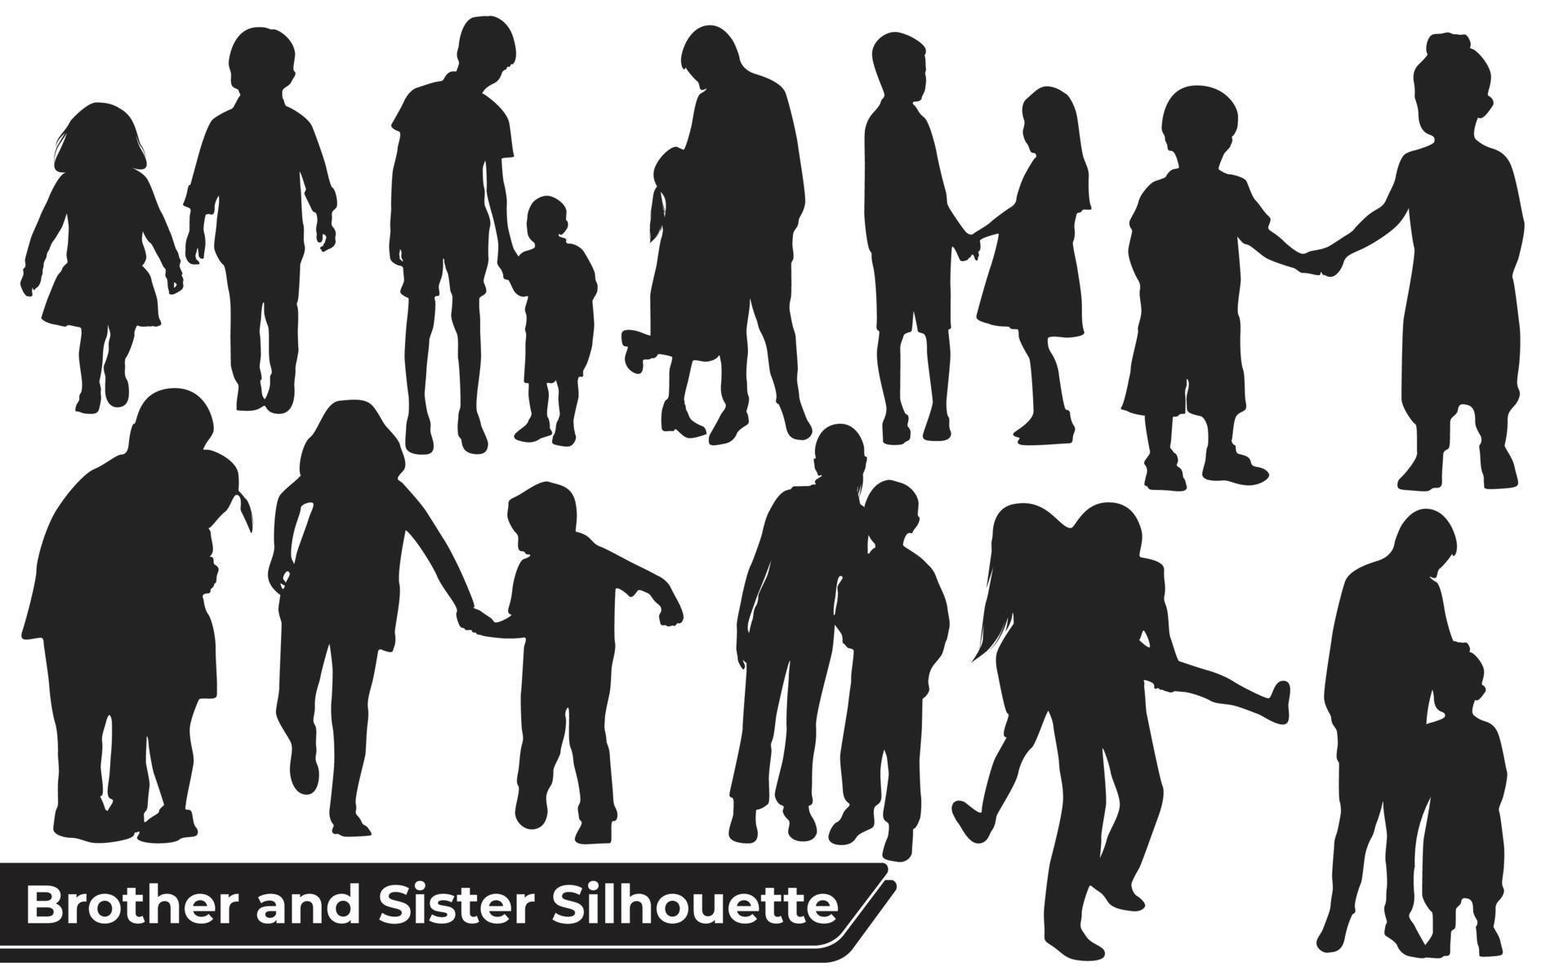 Collection of Brother and Sister Silhouettes in different poses set vector